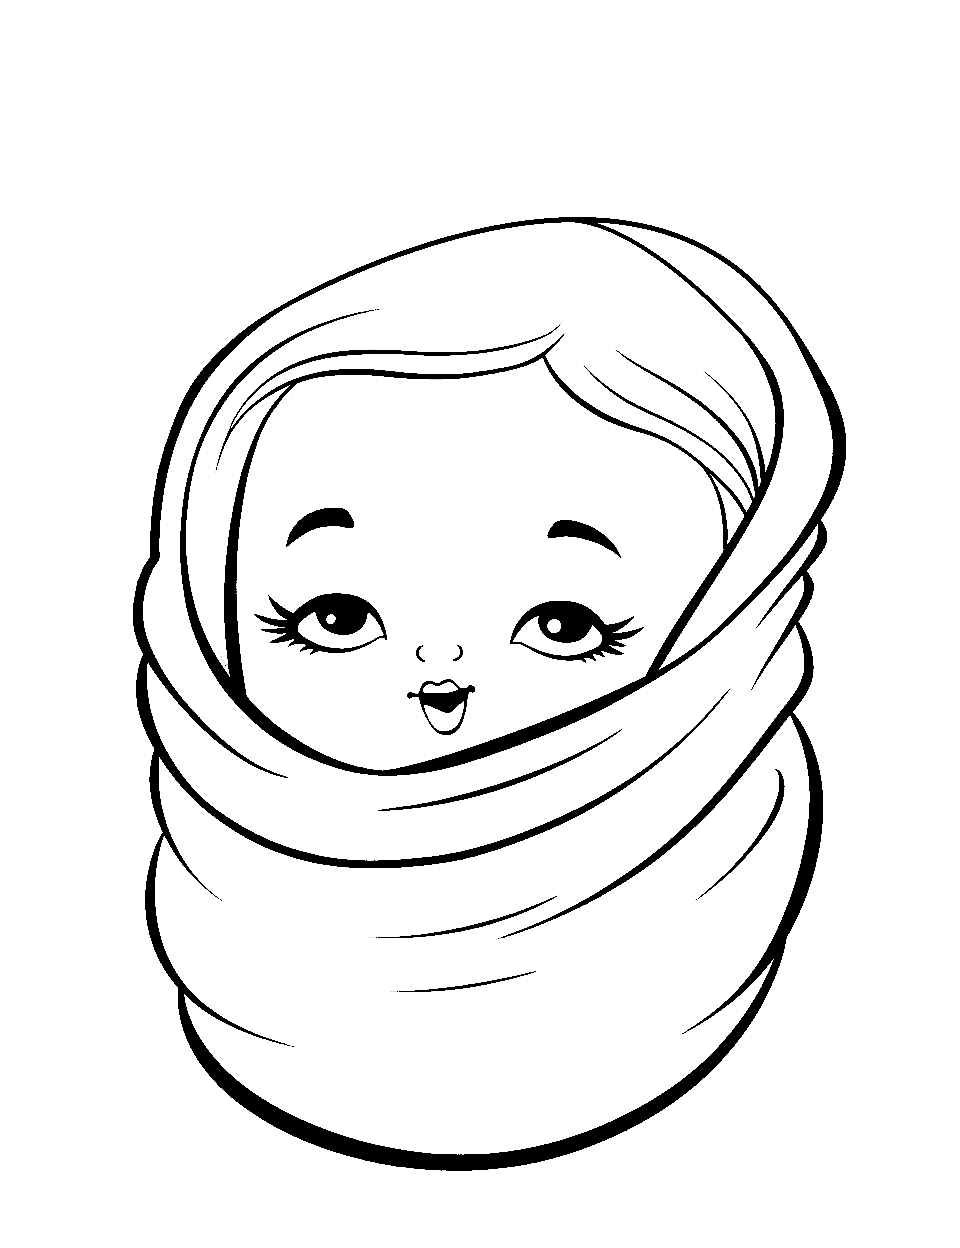 Baby Shopkin Naptime Coloring Page - A small baby Shopkin wrapped in a blanket.